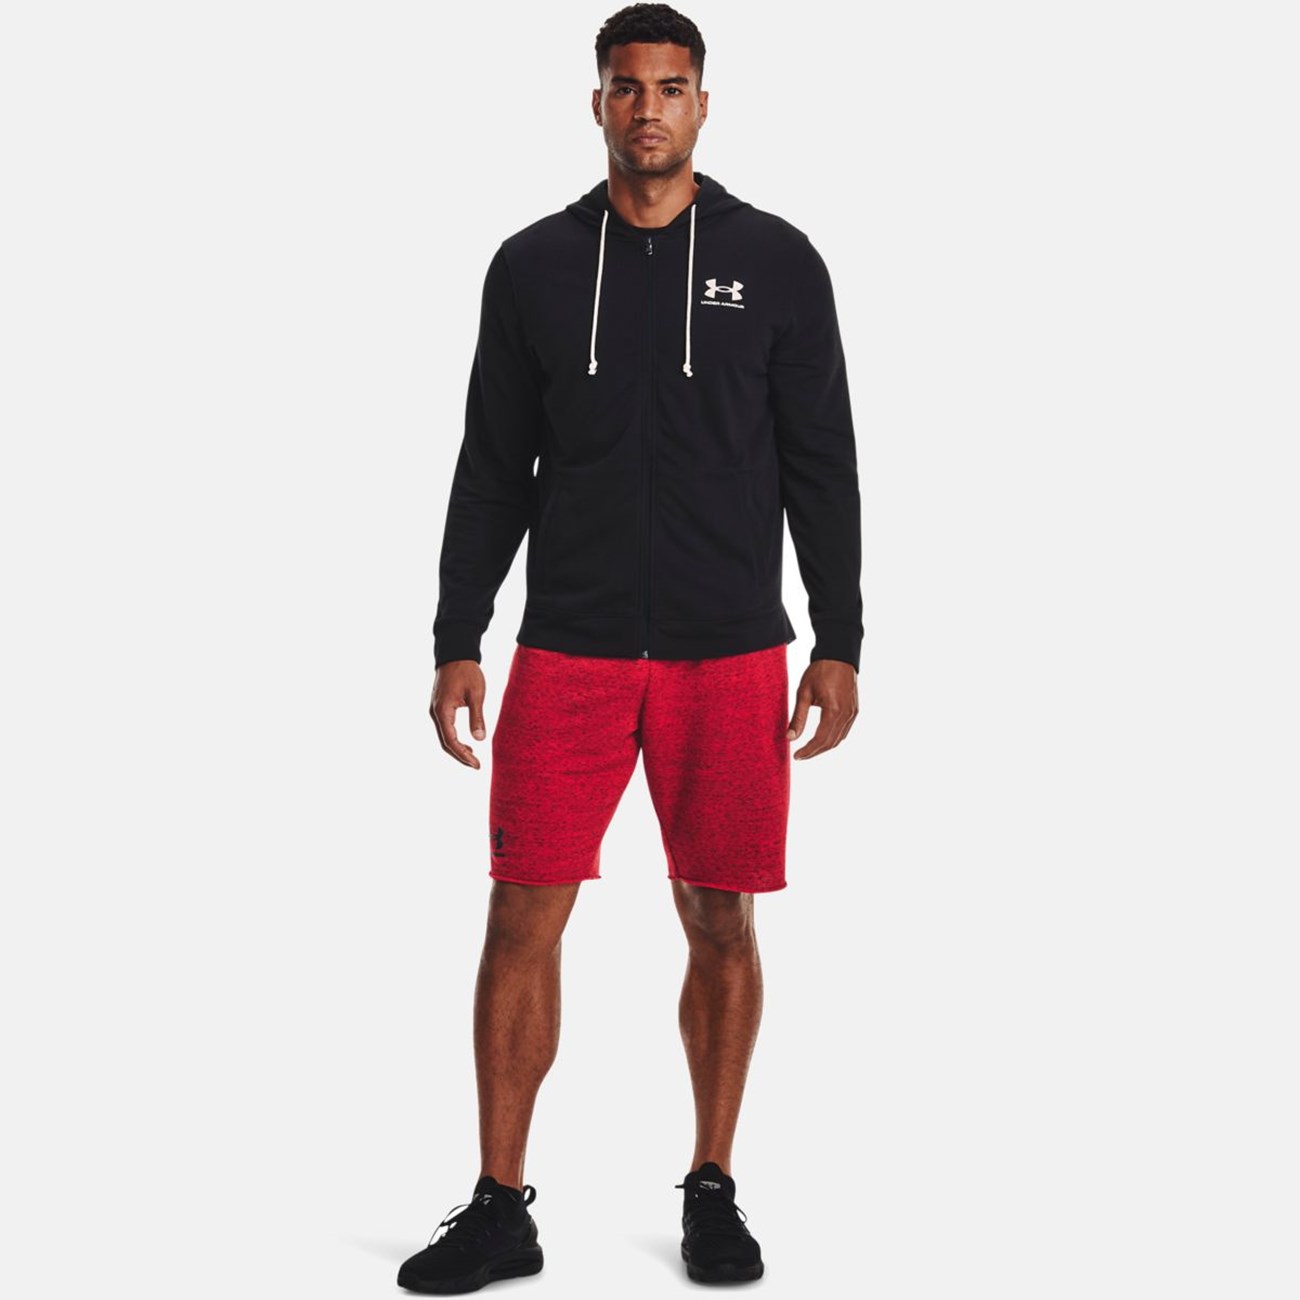 UNDER ARMOUR Ανδρική Ζακέτα Rival 1370409-001 - The Athlete's Foot